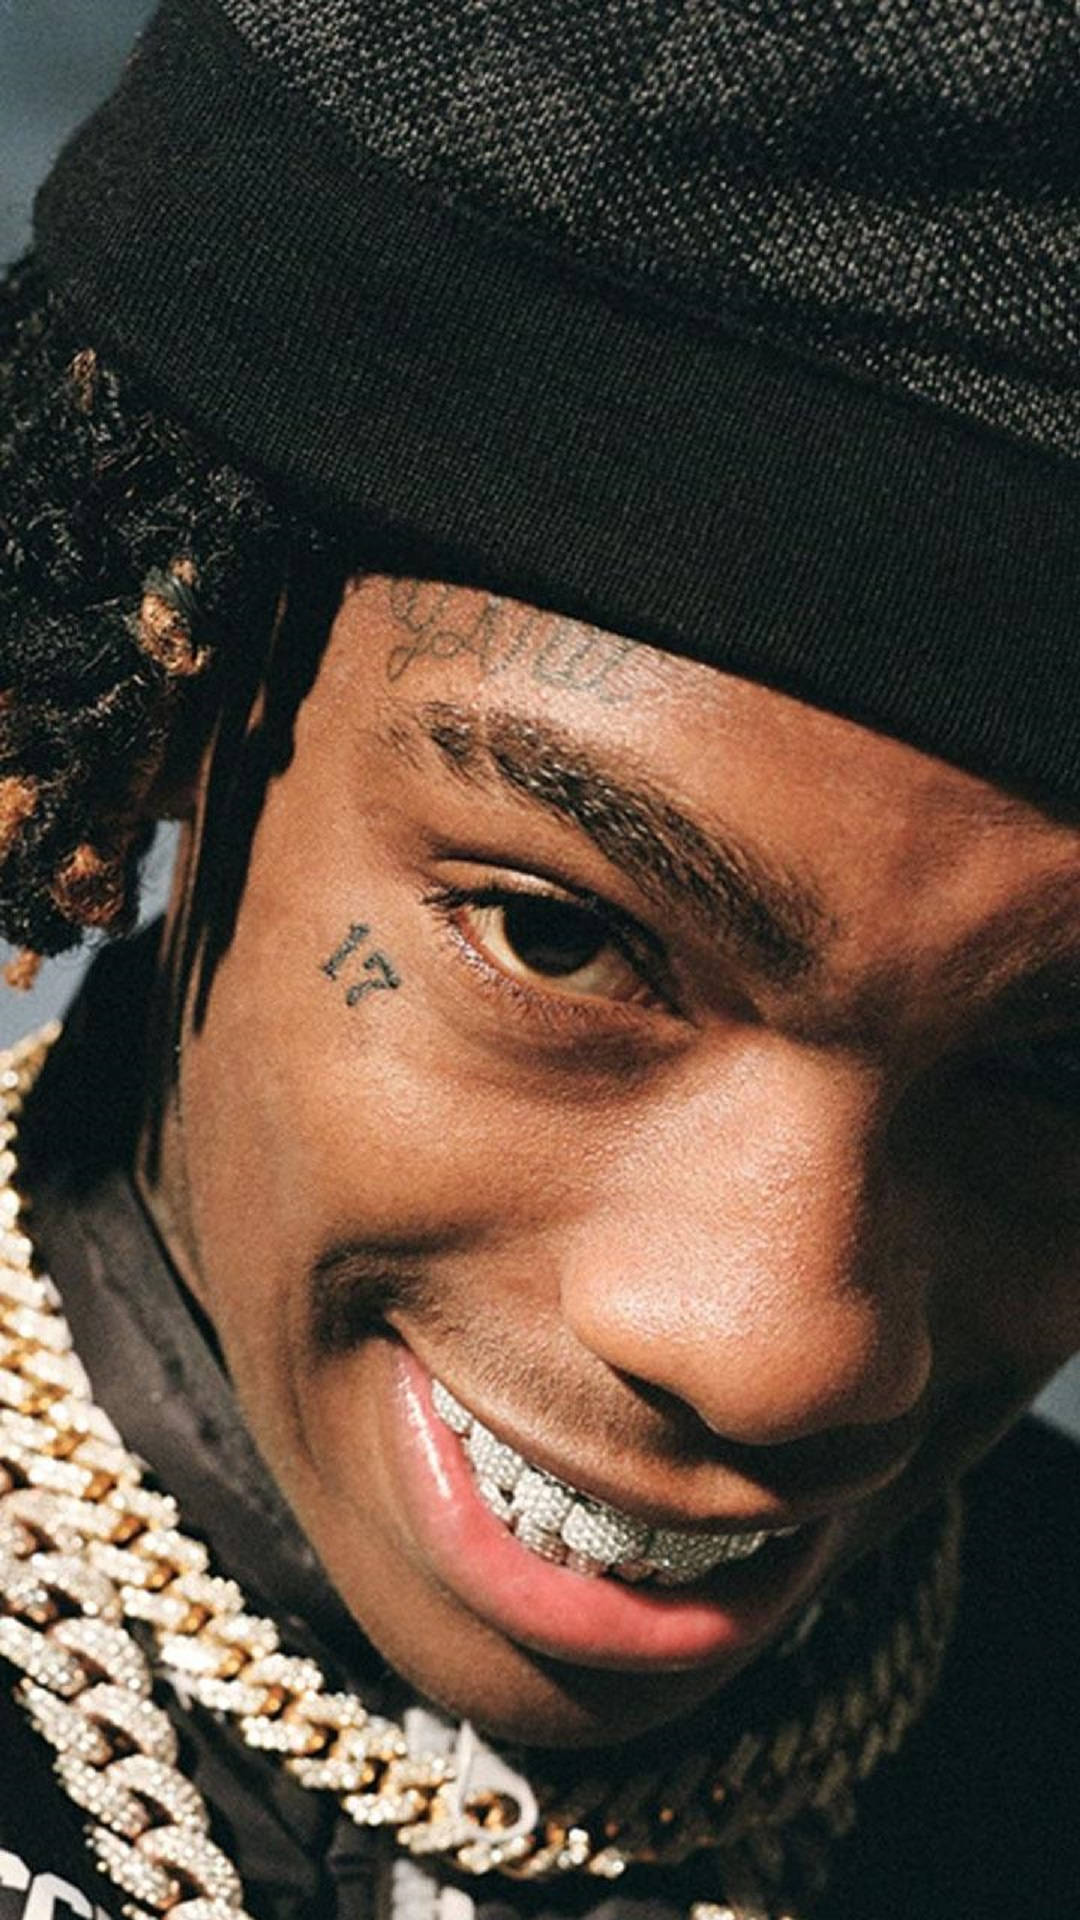 YNW Melly Wallpaper Discover more Aesthetic cool Iphone melly cartoon  Rapper wallpapers https  Cute rappers Red rapper aesthetic wallpaper  Lowkey rapper